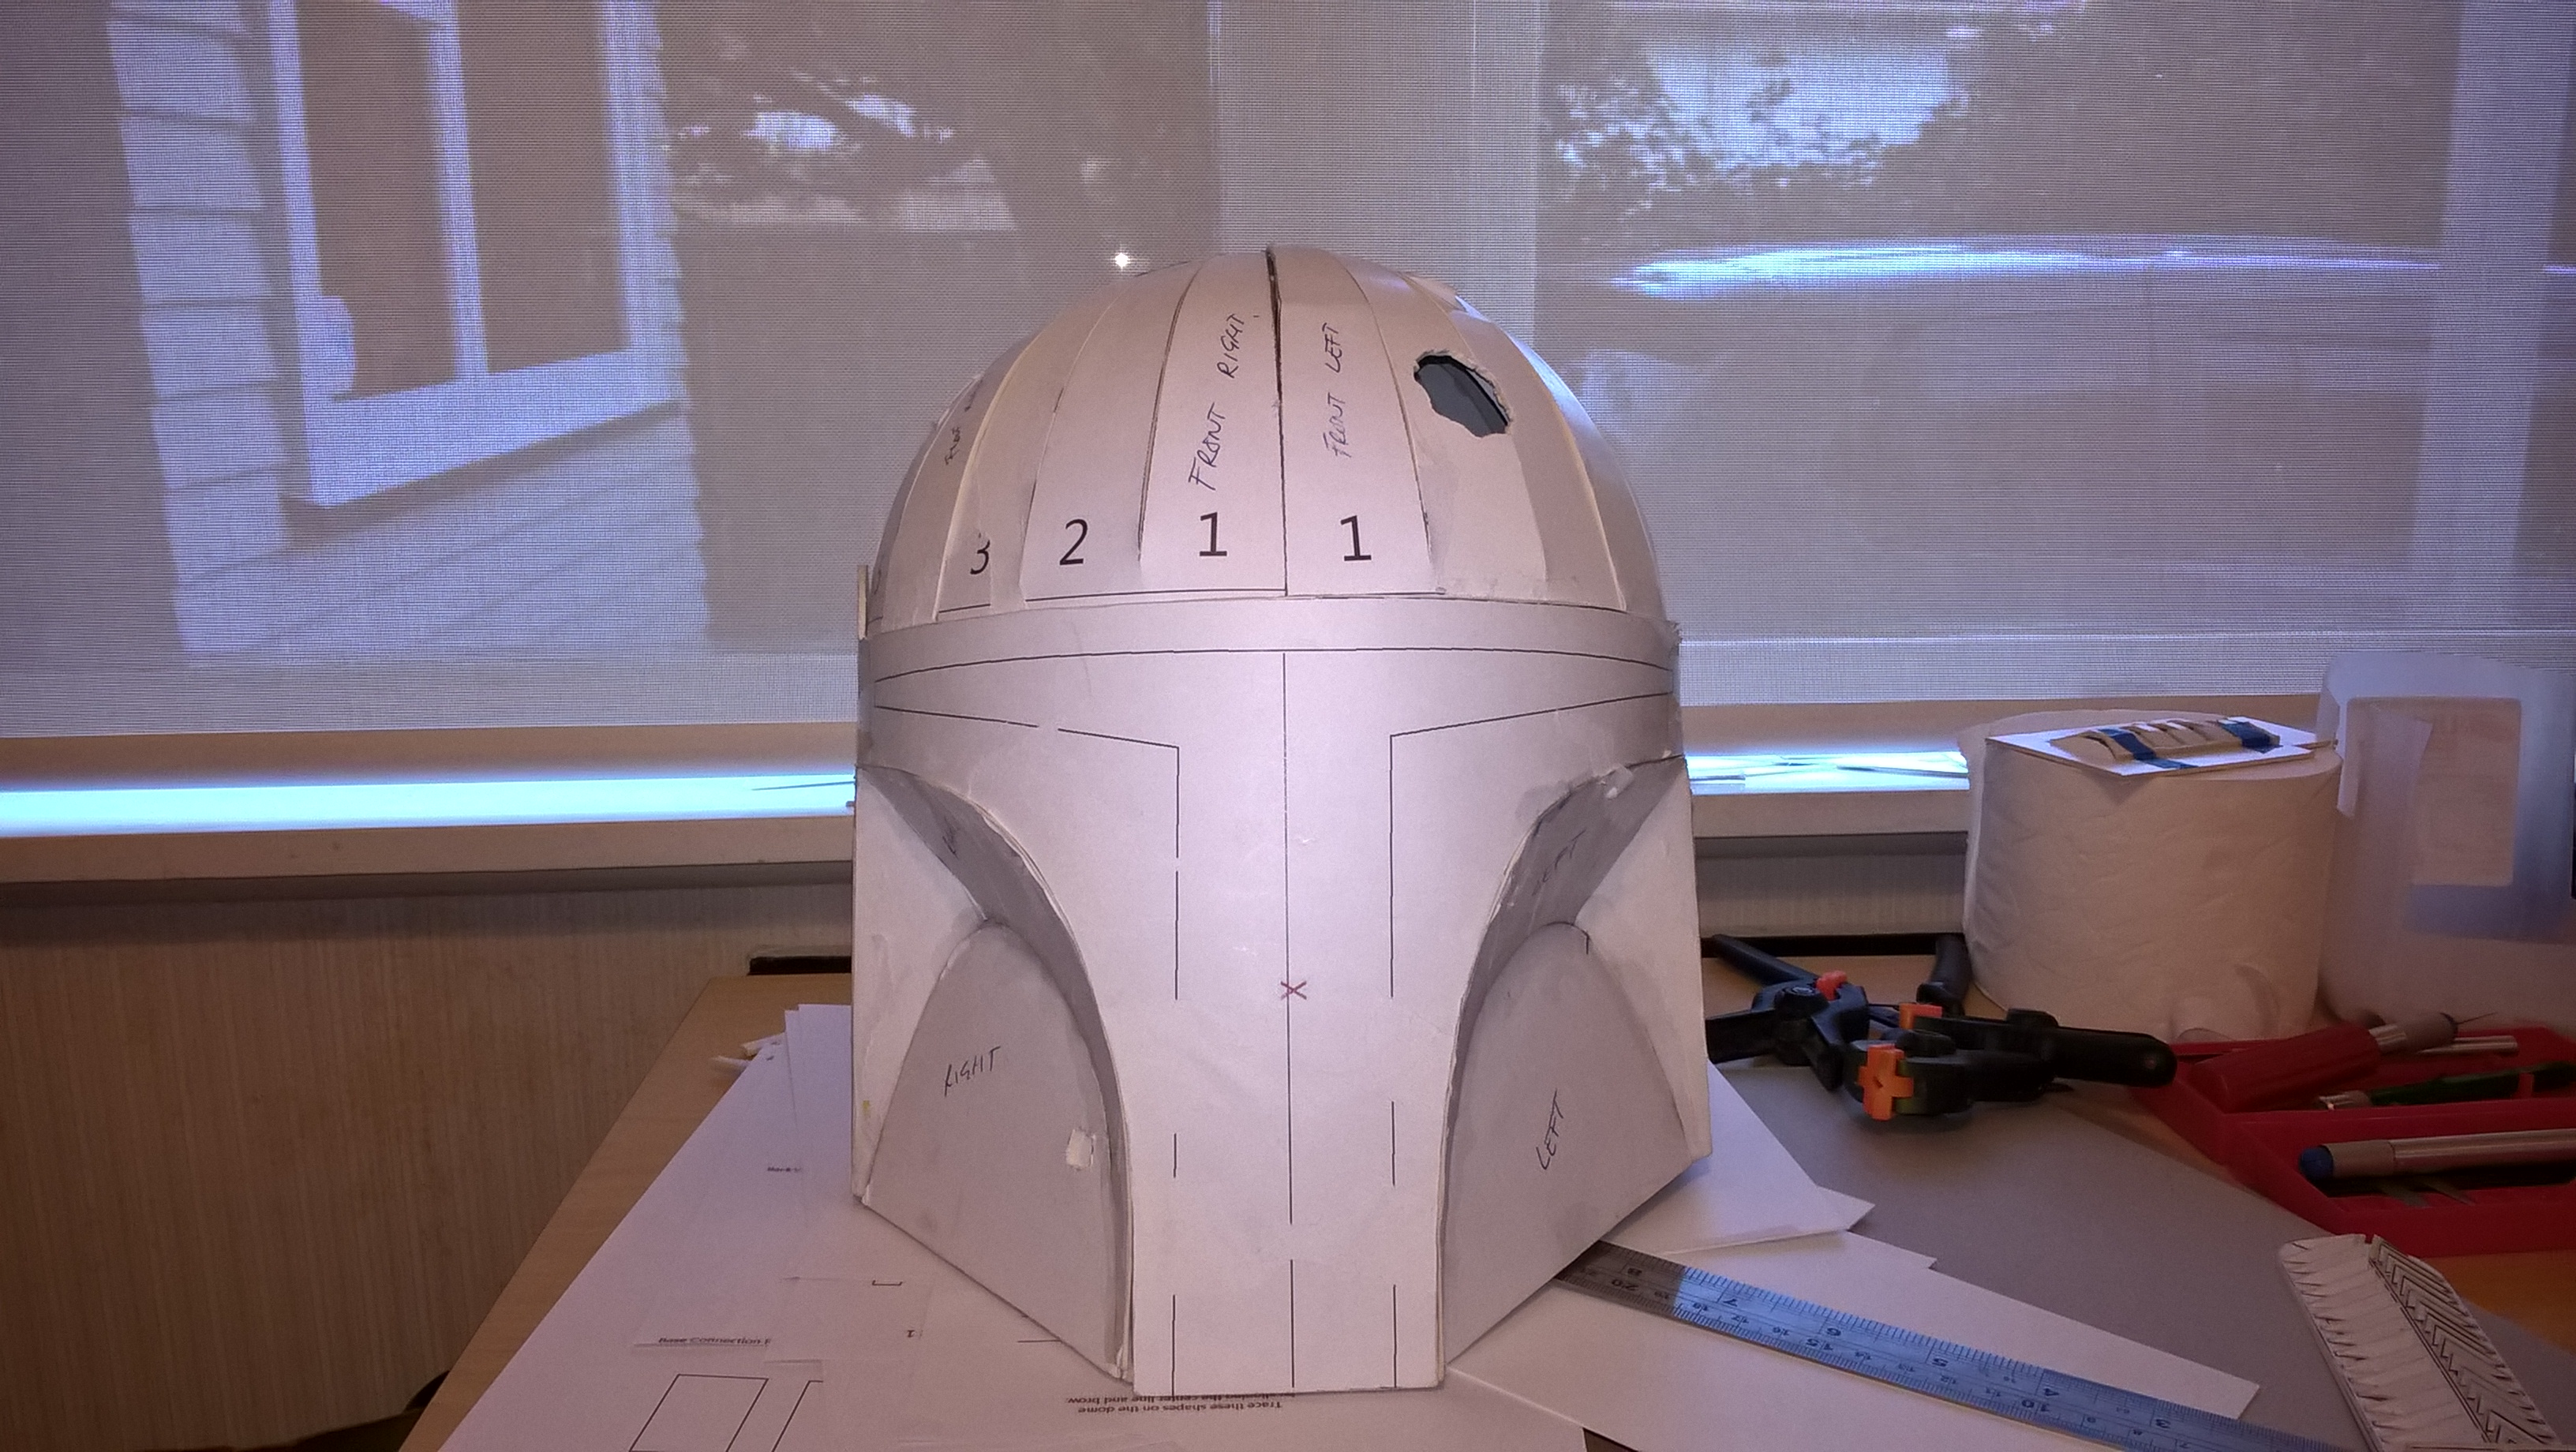 Dome in place and dent cut out.